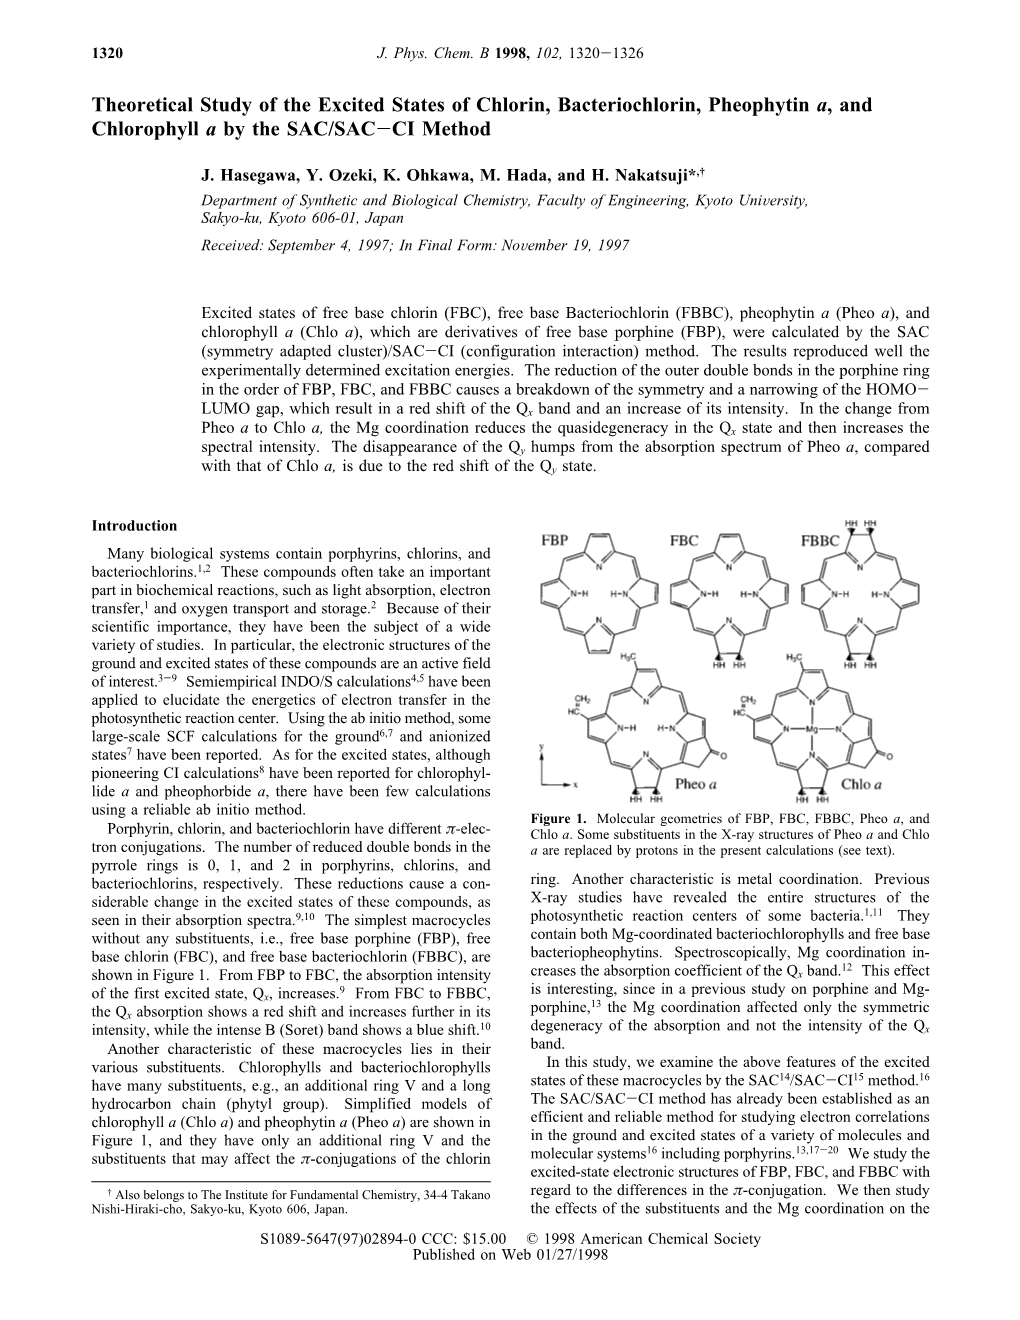 Theoretical Study of the Excited States of Chlorin, Bacteriochlorin, Pheophytin A, and Chlorophyll a by the SAC/SAC-CI Method